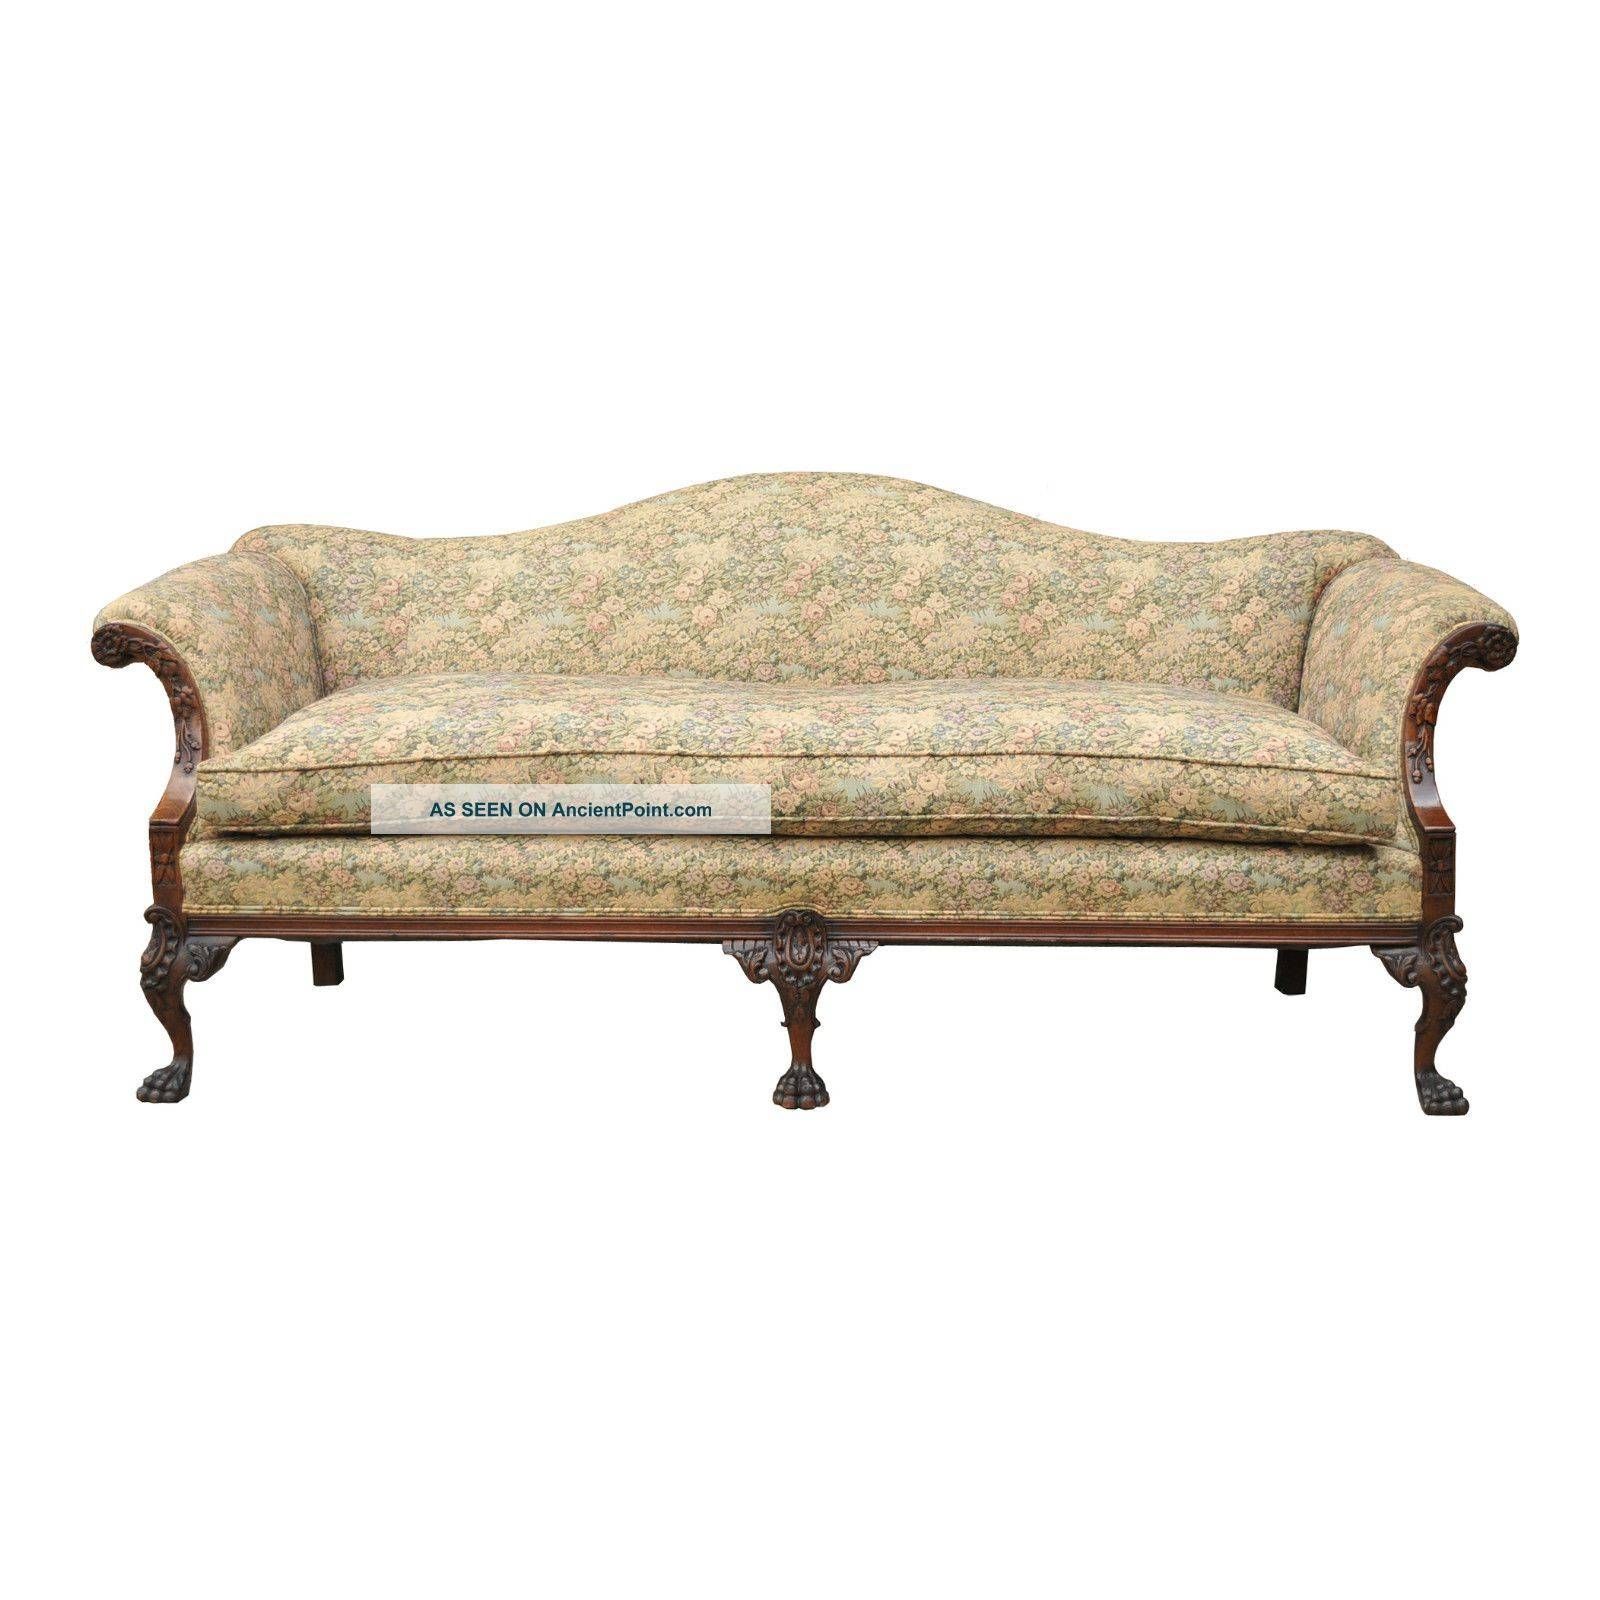 Sofas Center : 38 Wonderful Old Fashioned Sofa Photos Design Old Throughout Old Fashioned Sofas (View 17 of 30)